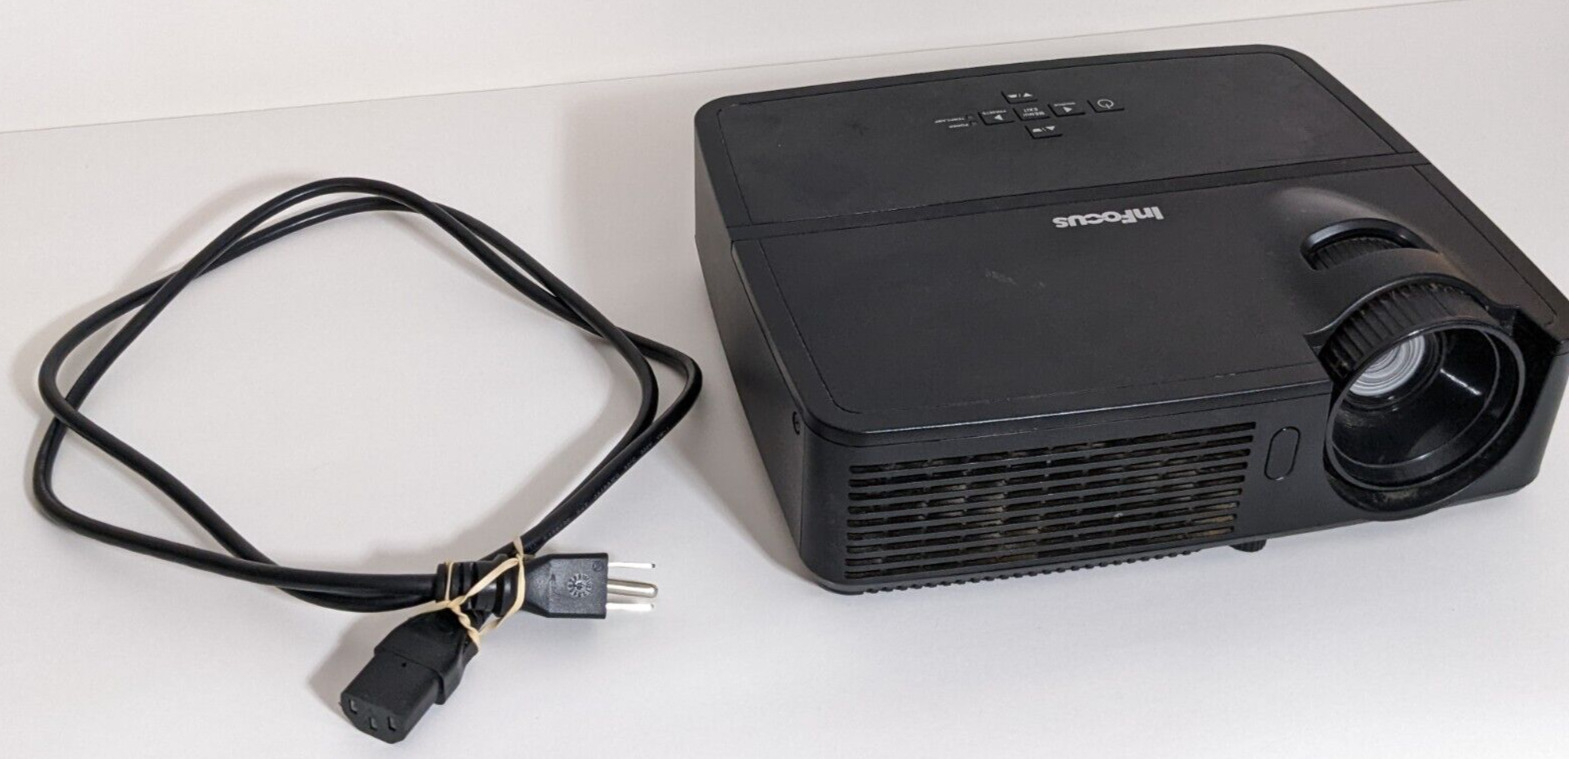 InFocus IN116 3D ready WXGA 2700 Lumens Portable 3000:1 DLP Projector TESTED